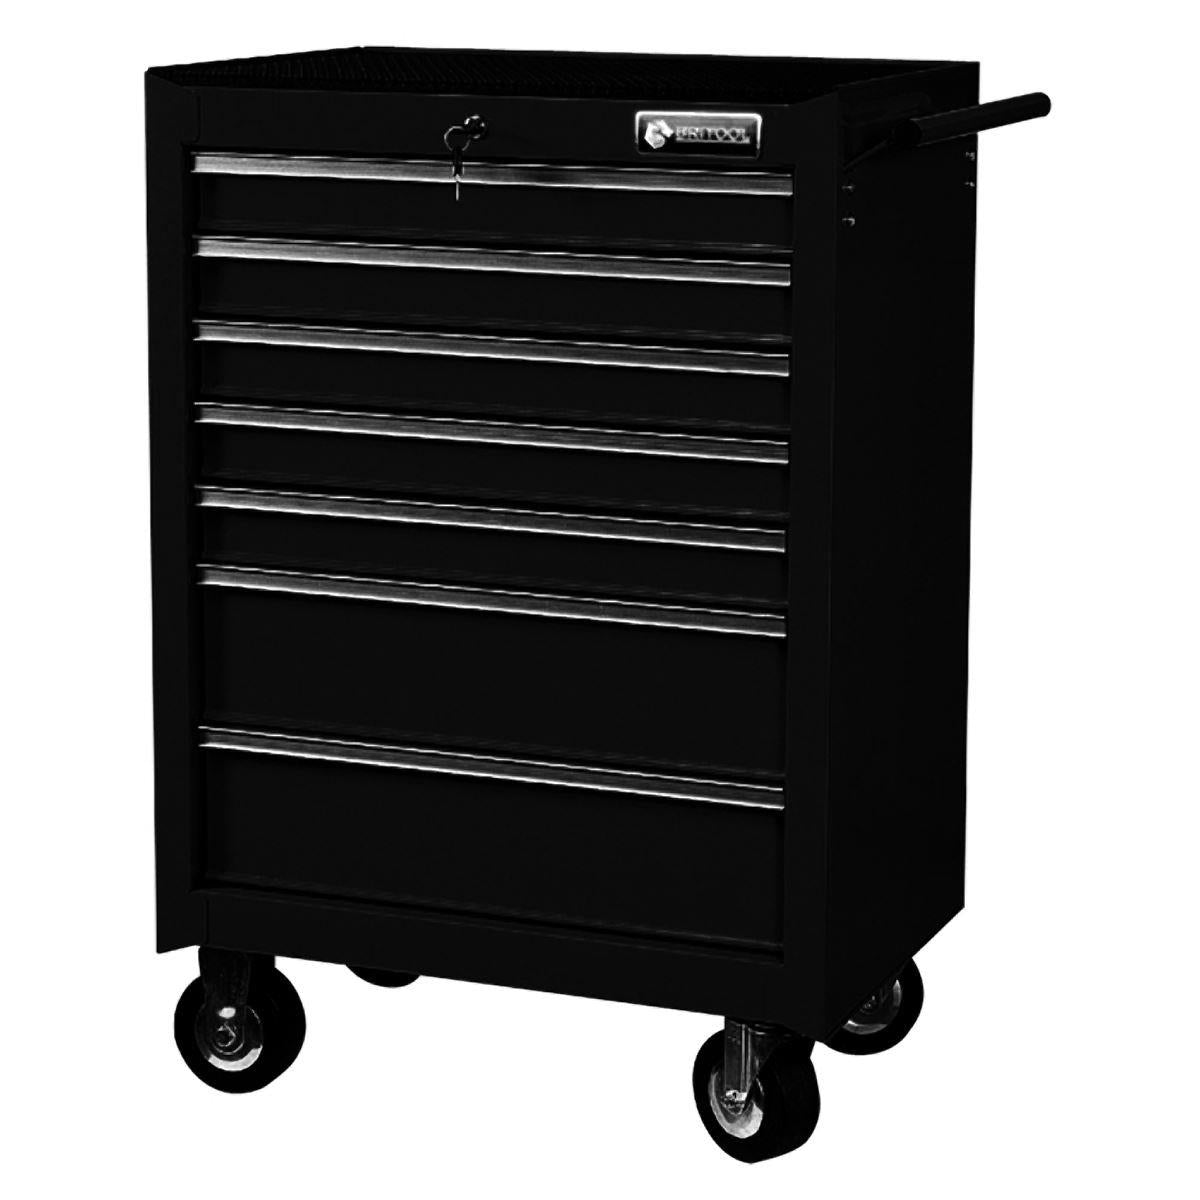 Expert by Facom E010143B Classic Roller Cabinet 7 Drawer - BLACK